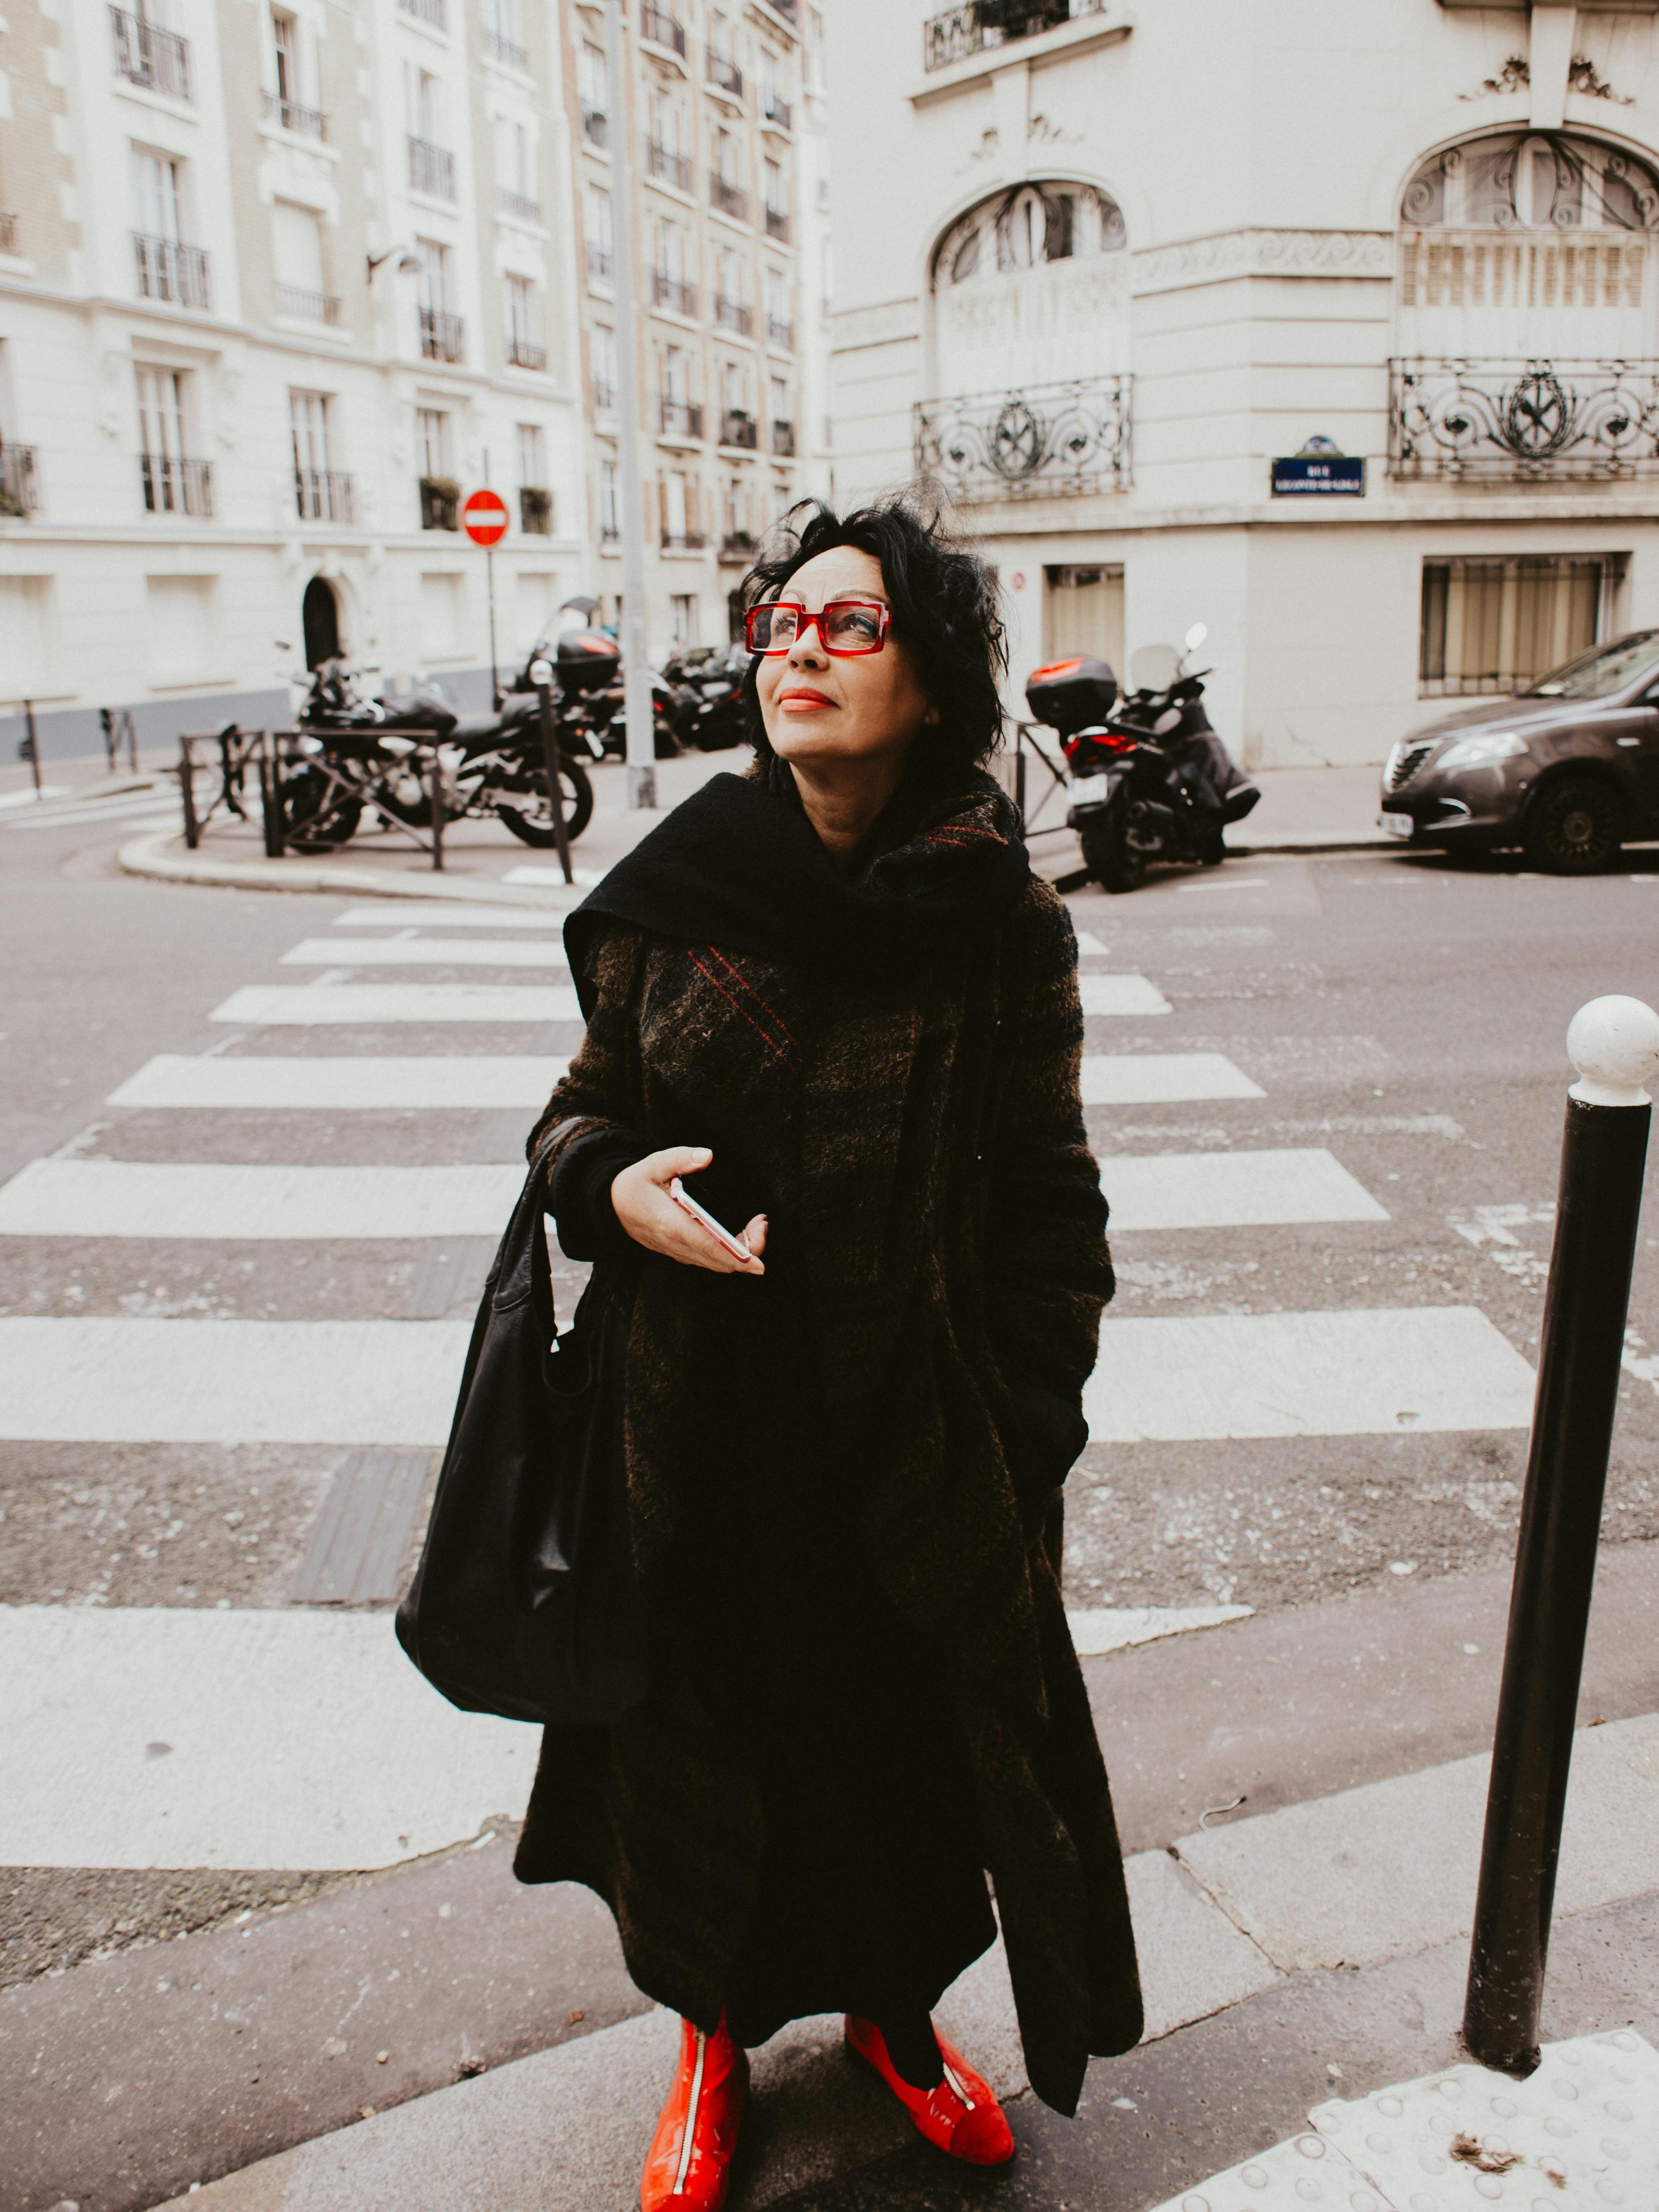 Woman wearing black coat and staring at a building | Photo: Pexels